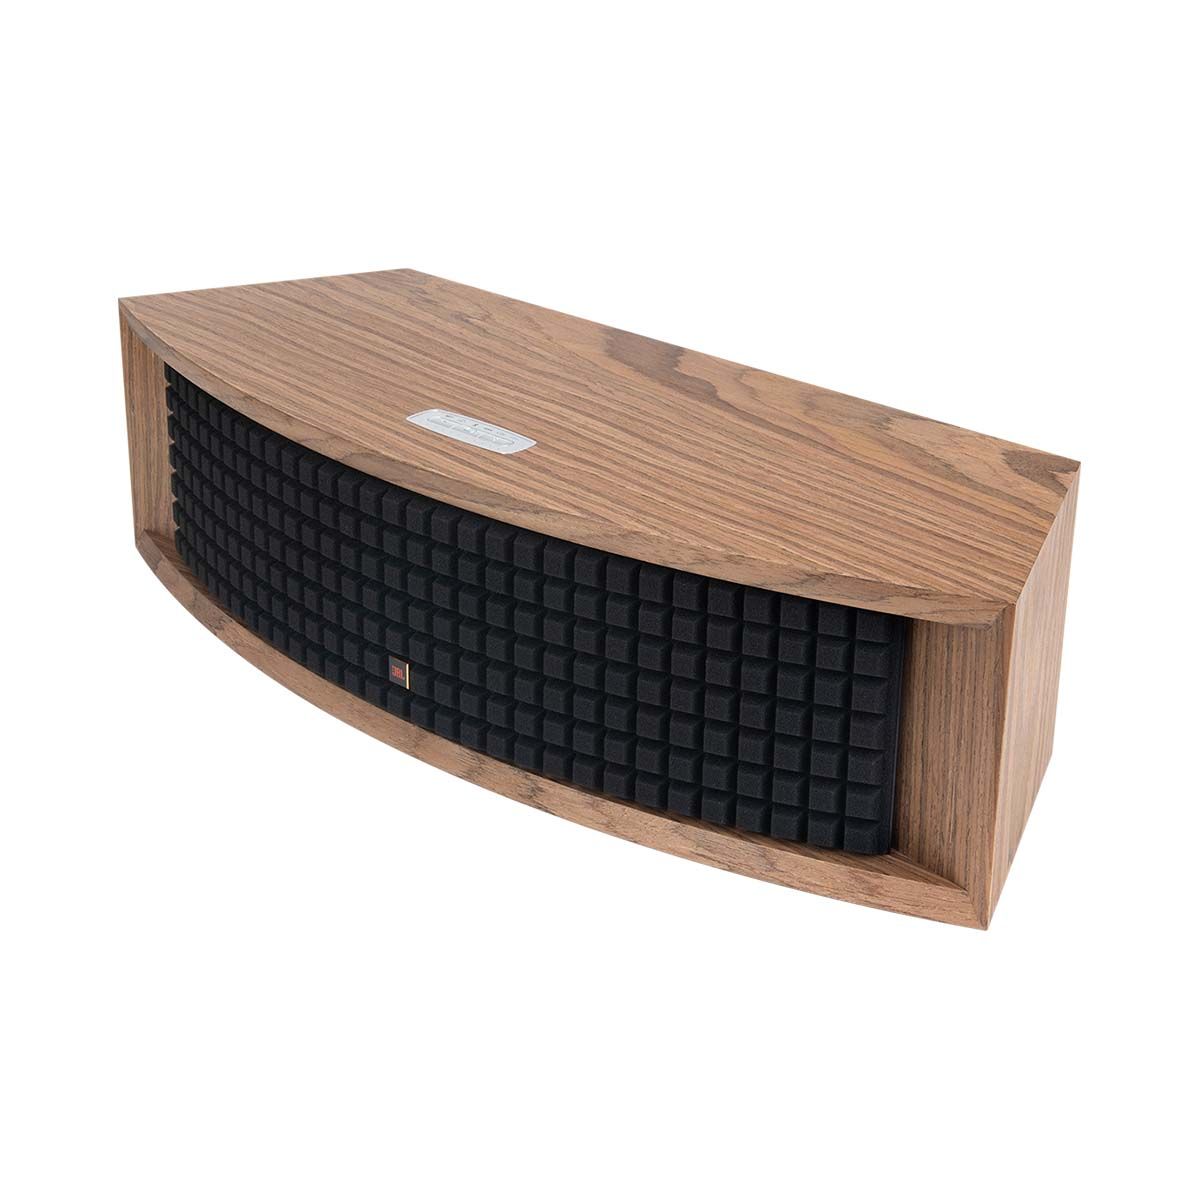 JBL L42ms Integrated Music System walnut angled front view with grille